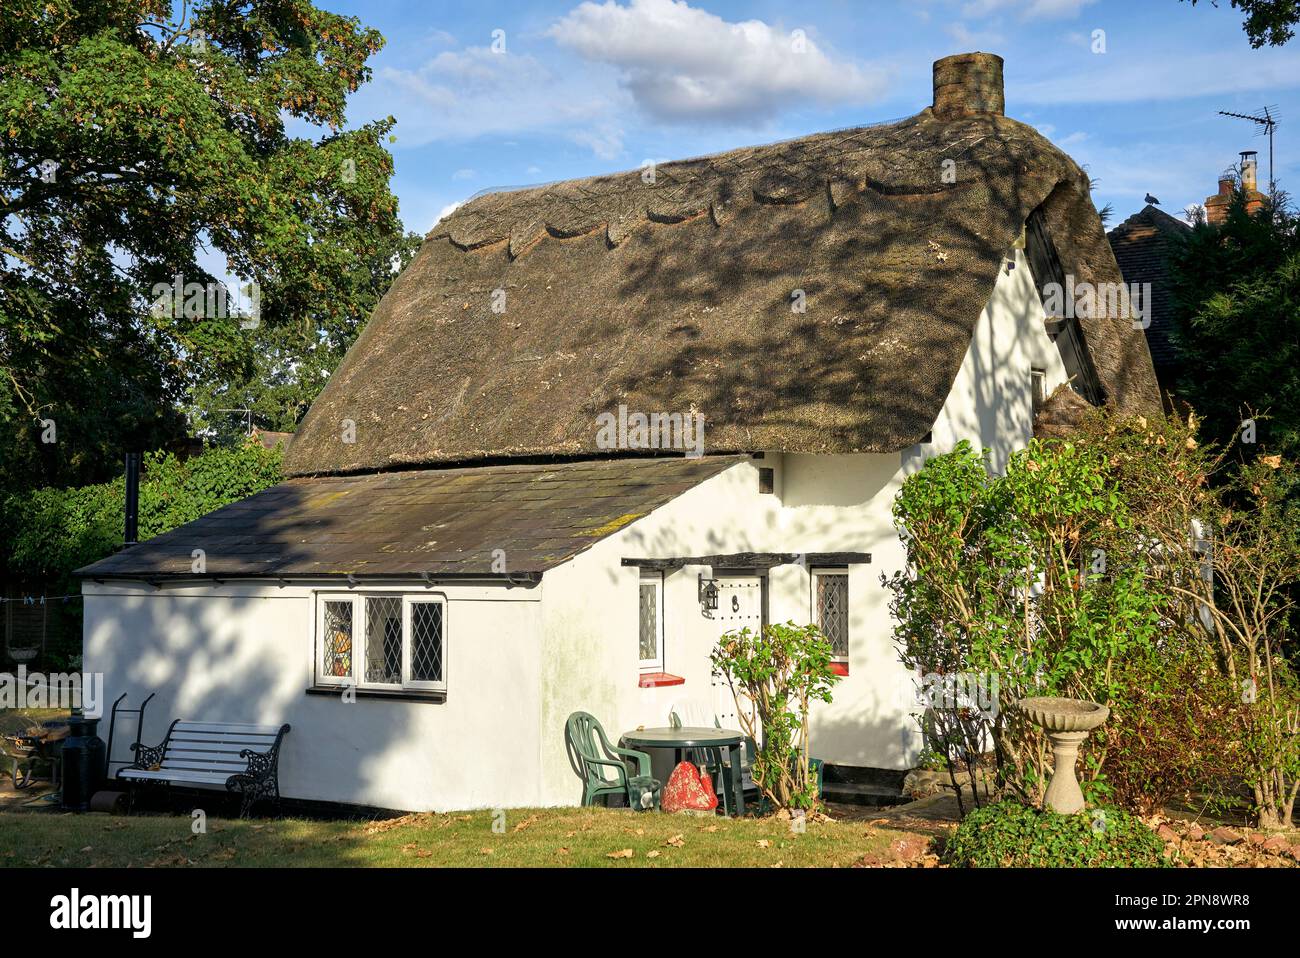 Thatched Cottage UK. Picturesque traditional thatched cottage exterior in an English rural setting. England UK Stock Photo